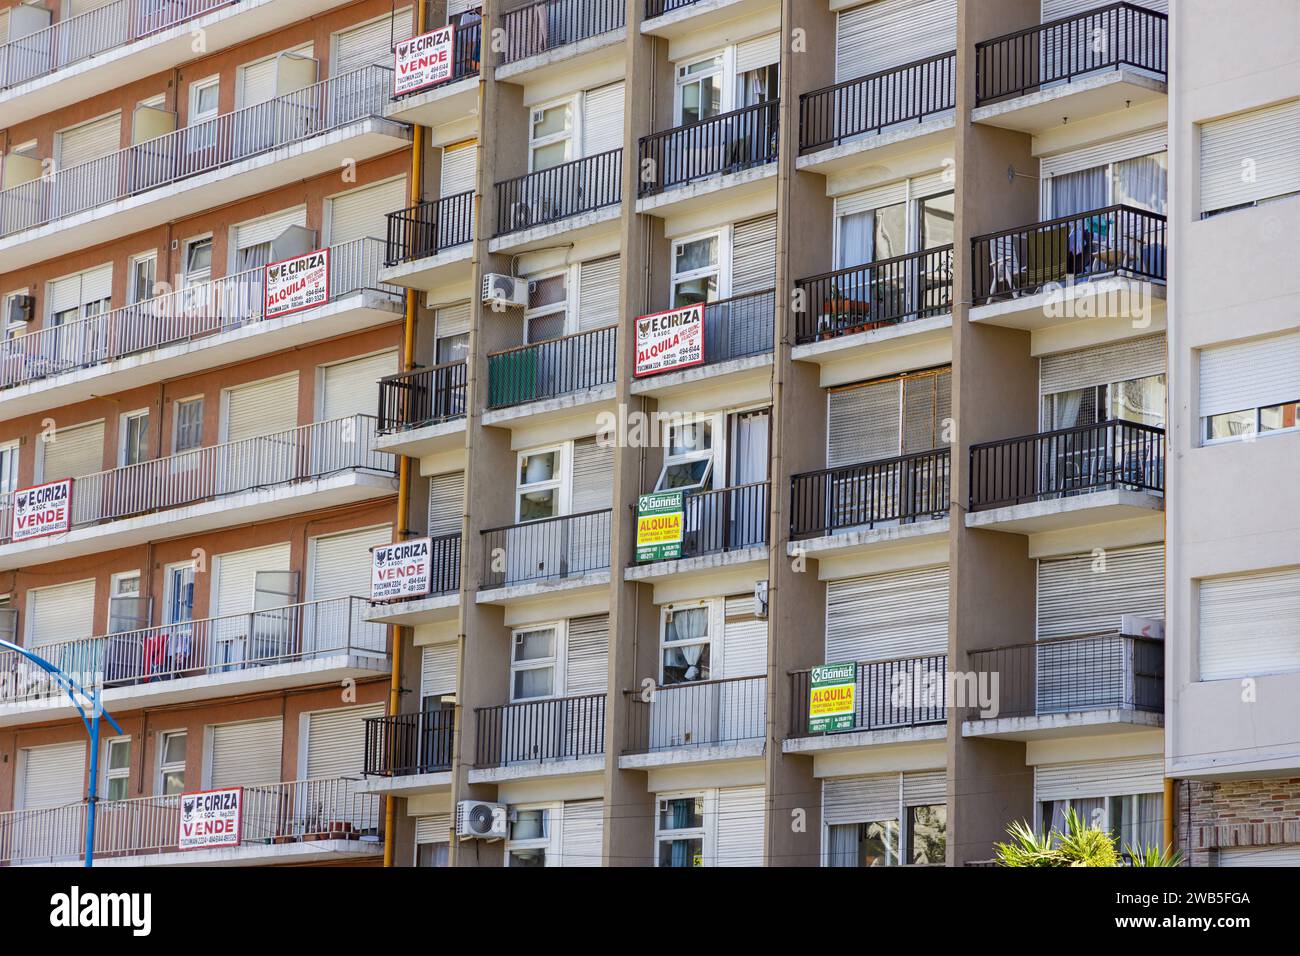 Mar del Plata, Argentina - December 30th, 2023: Apartment building with for sale and rent signs in Spanish. Stock Photo